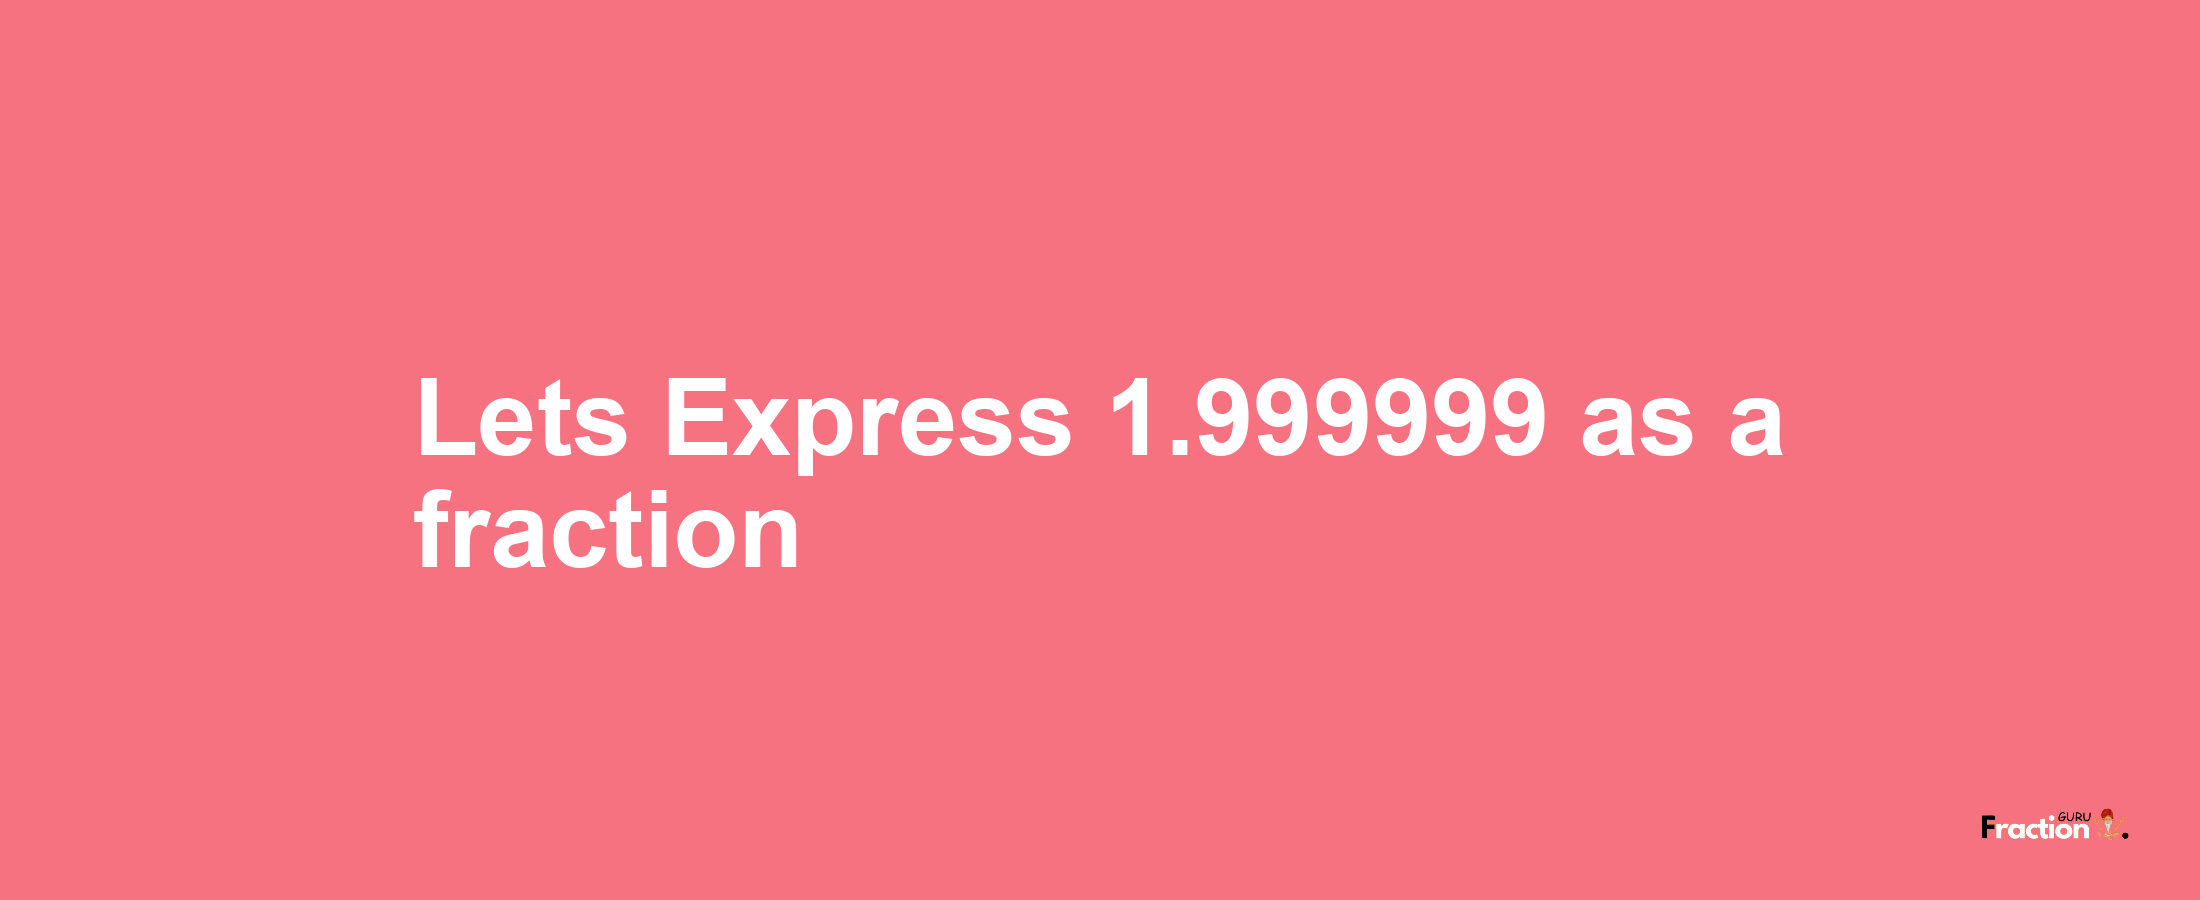 Lets Express 1.999999 as afraction